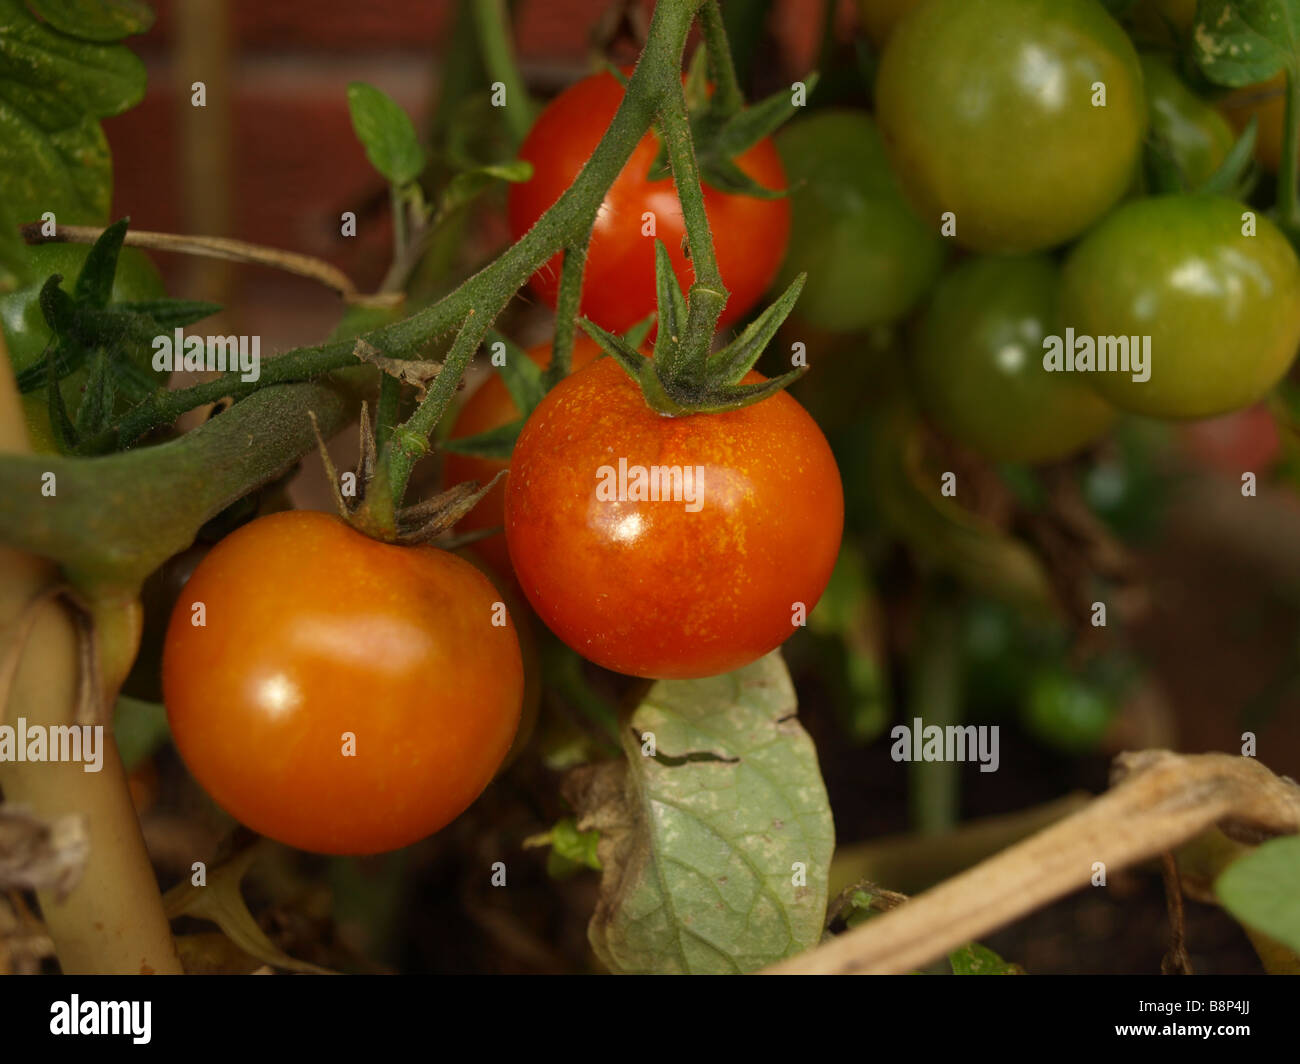 OLYMPUS DIGITAL CAMERA Homegrown Red and Green Tomatoes growing on the plant. Stock Photo